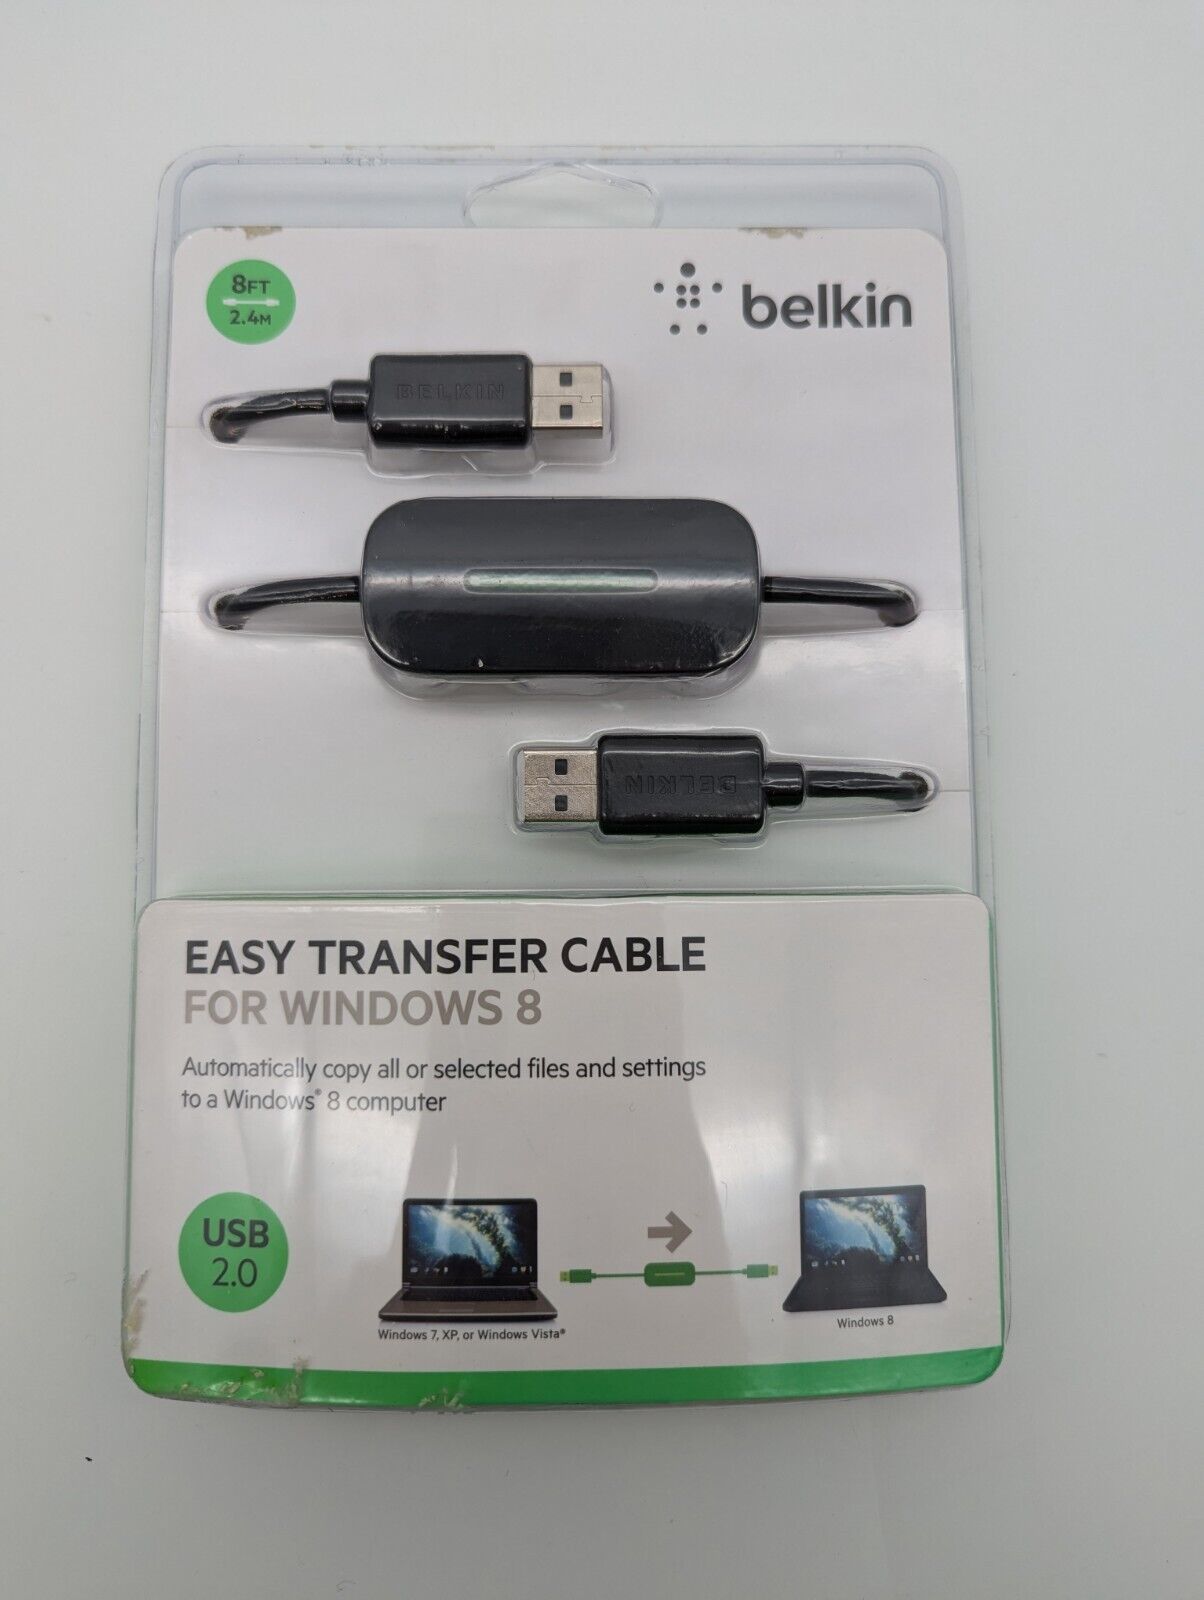 Belkin Easy Transfer Cable for Windows 8 USB 2.0 F4U060 - New Unopened